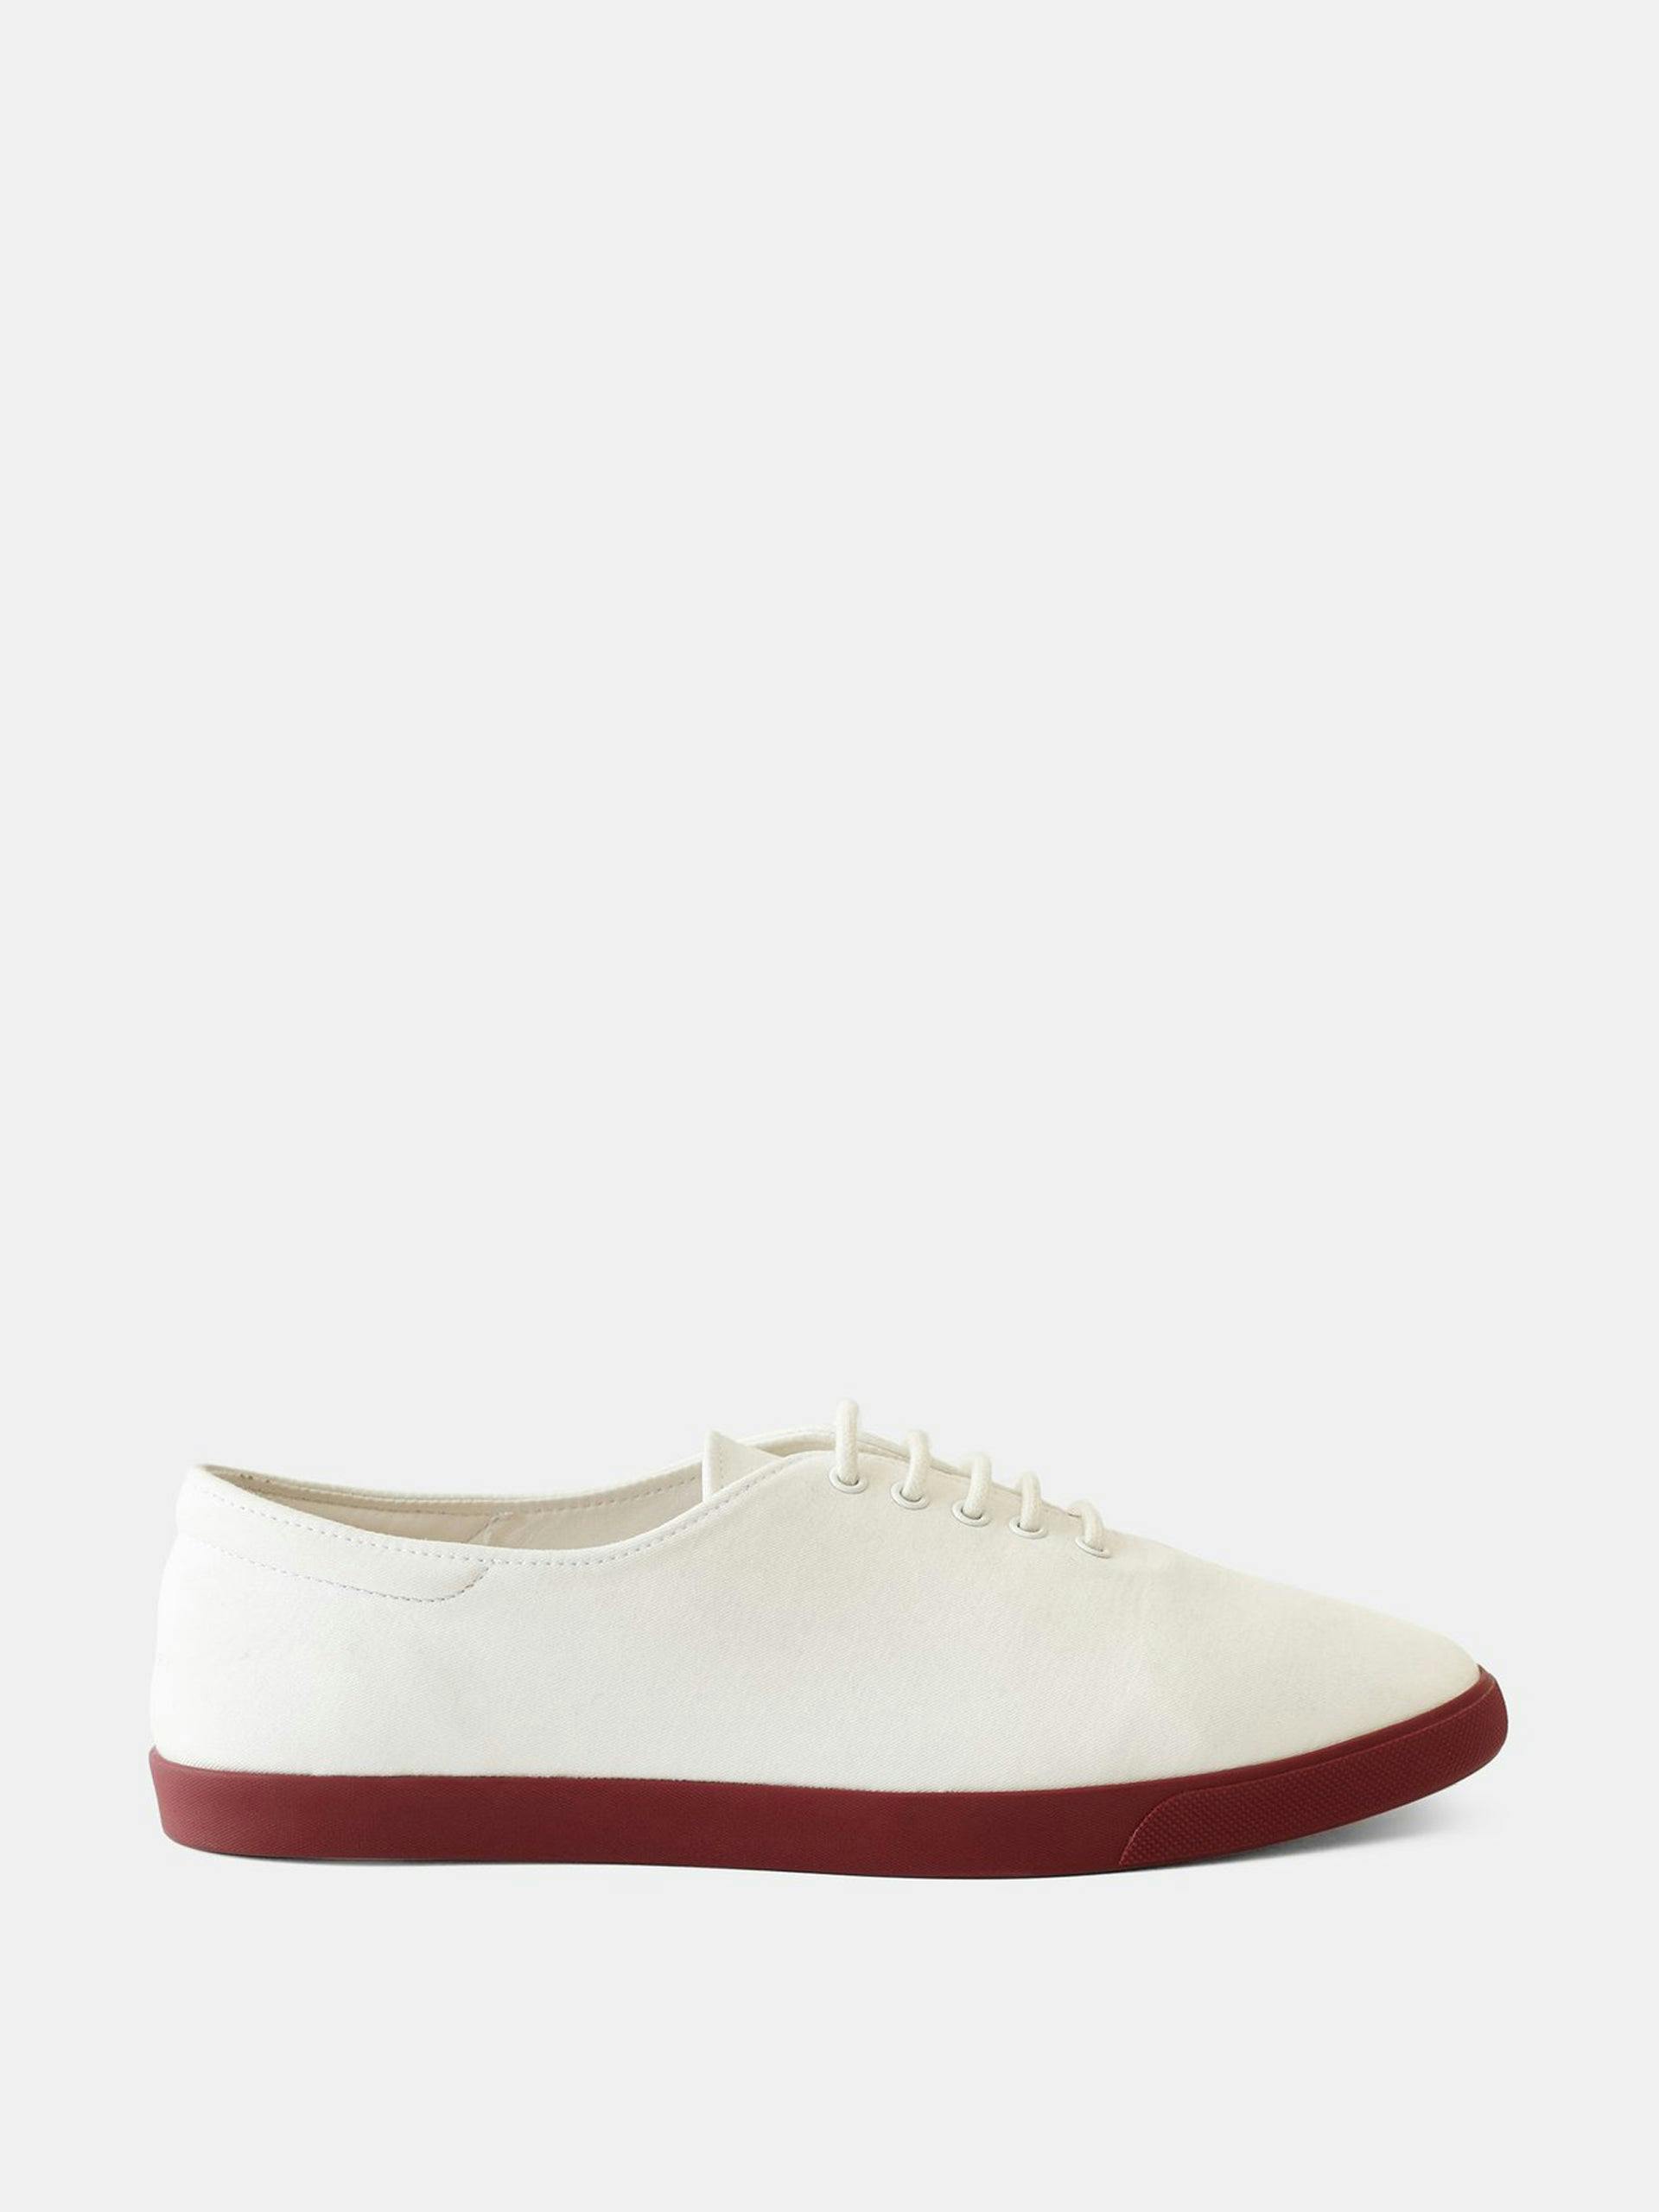 White canvas trainers with burgundy sole